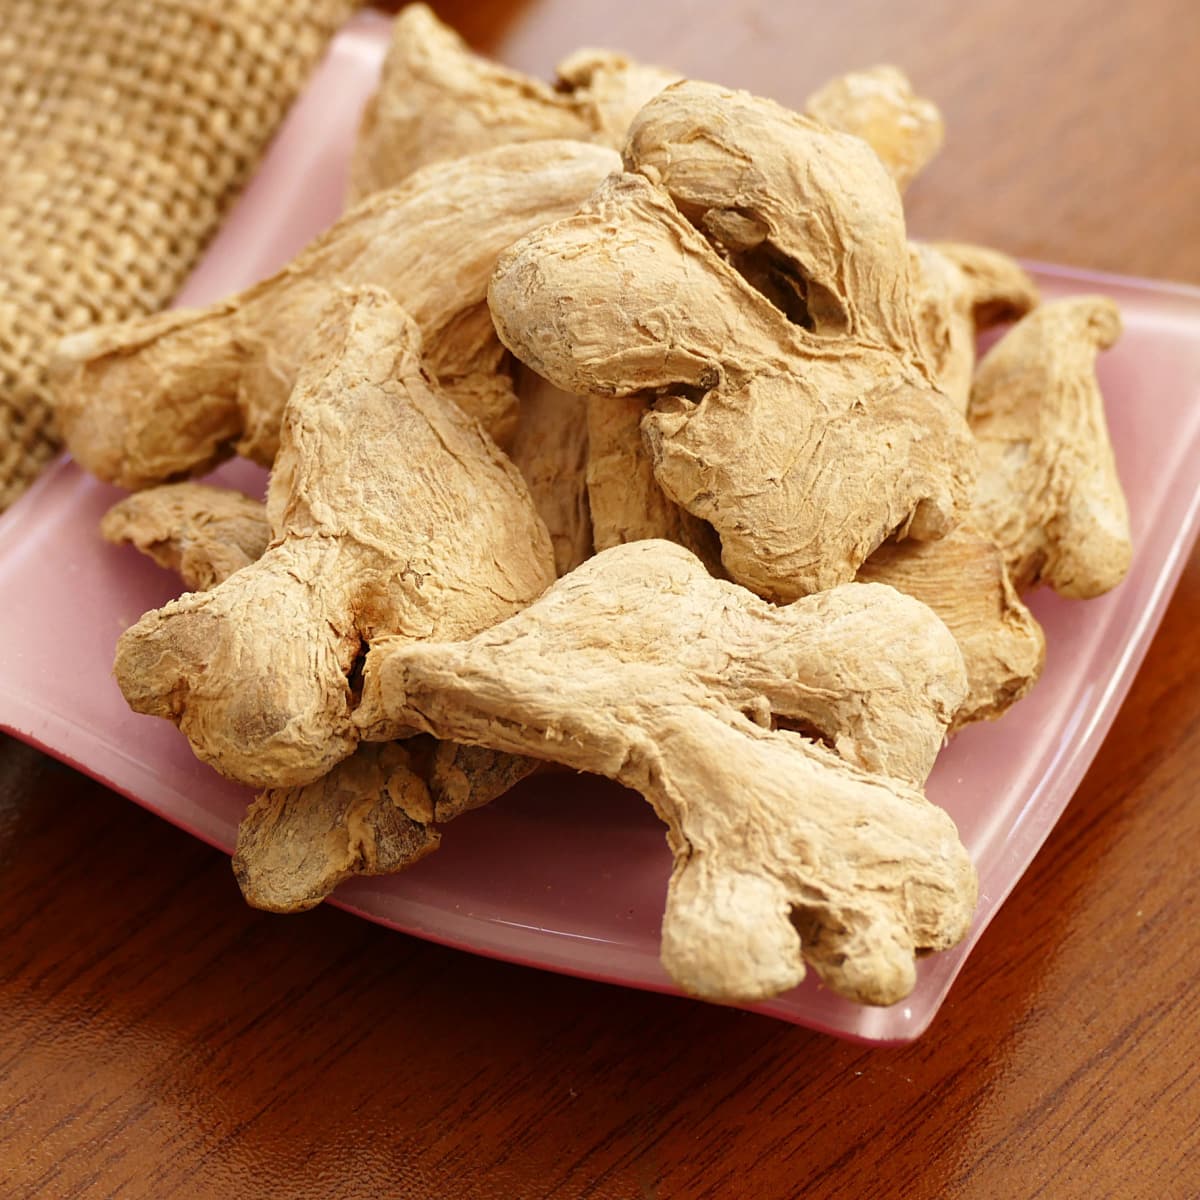 Whole Dried Ginger Roots on a Plate